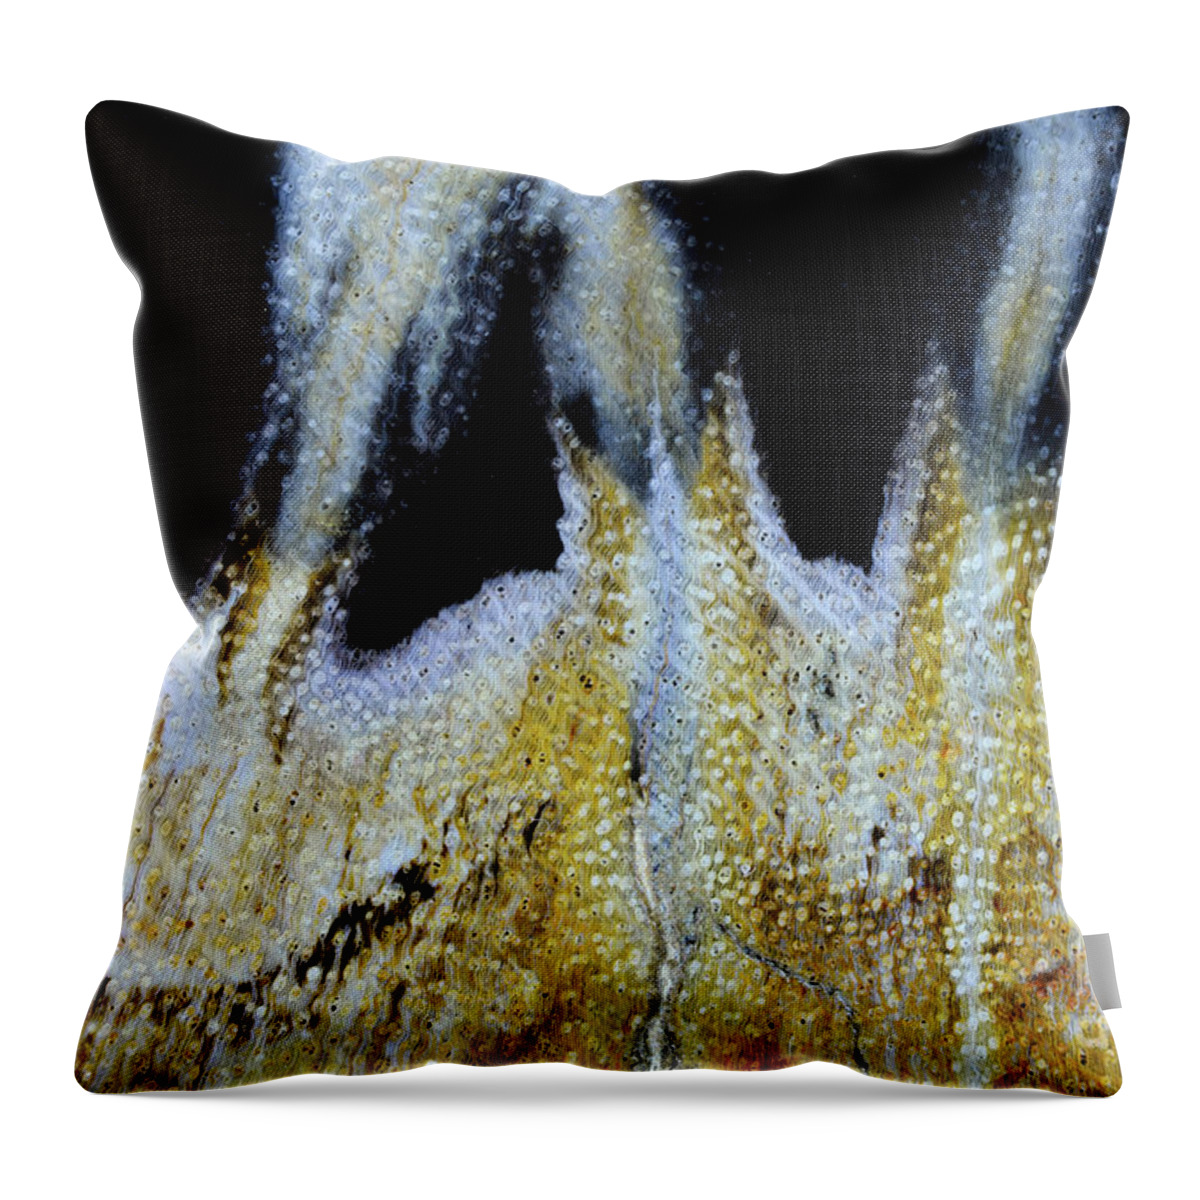 Fine Art Photography Throw Pillow featuring the photograph The Phoenix by John Strong